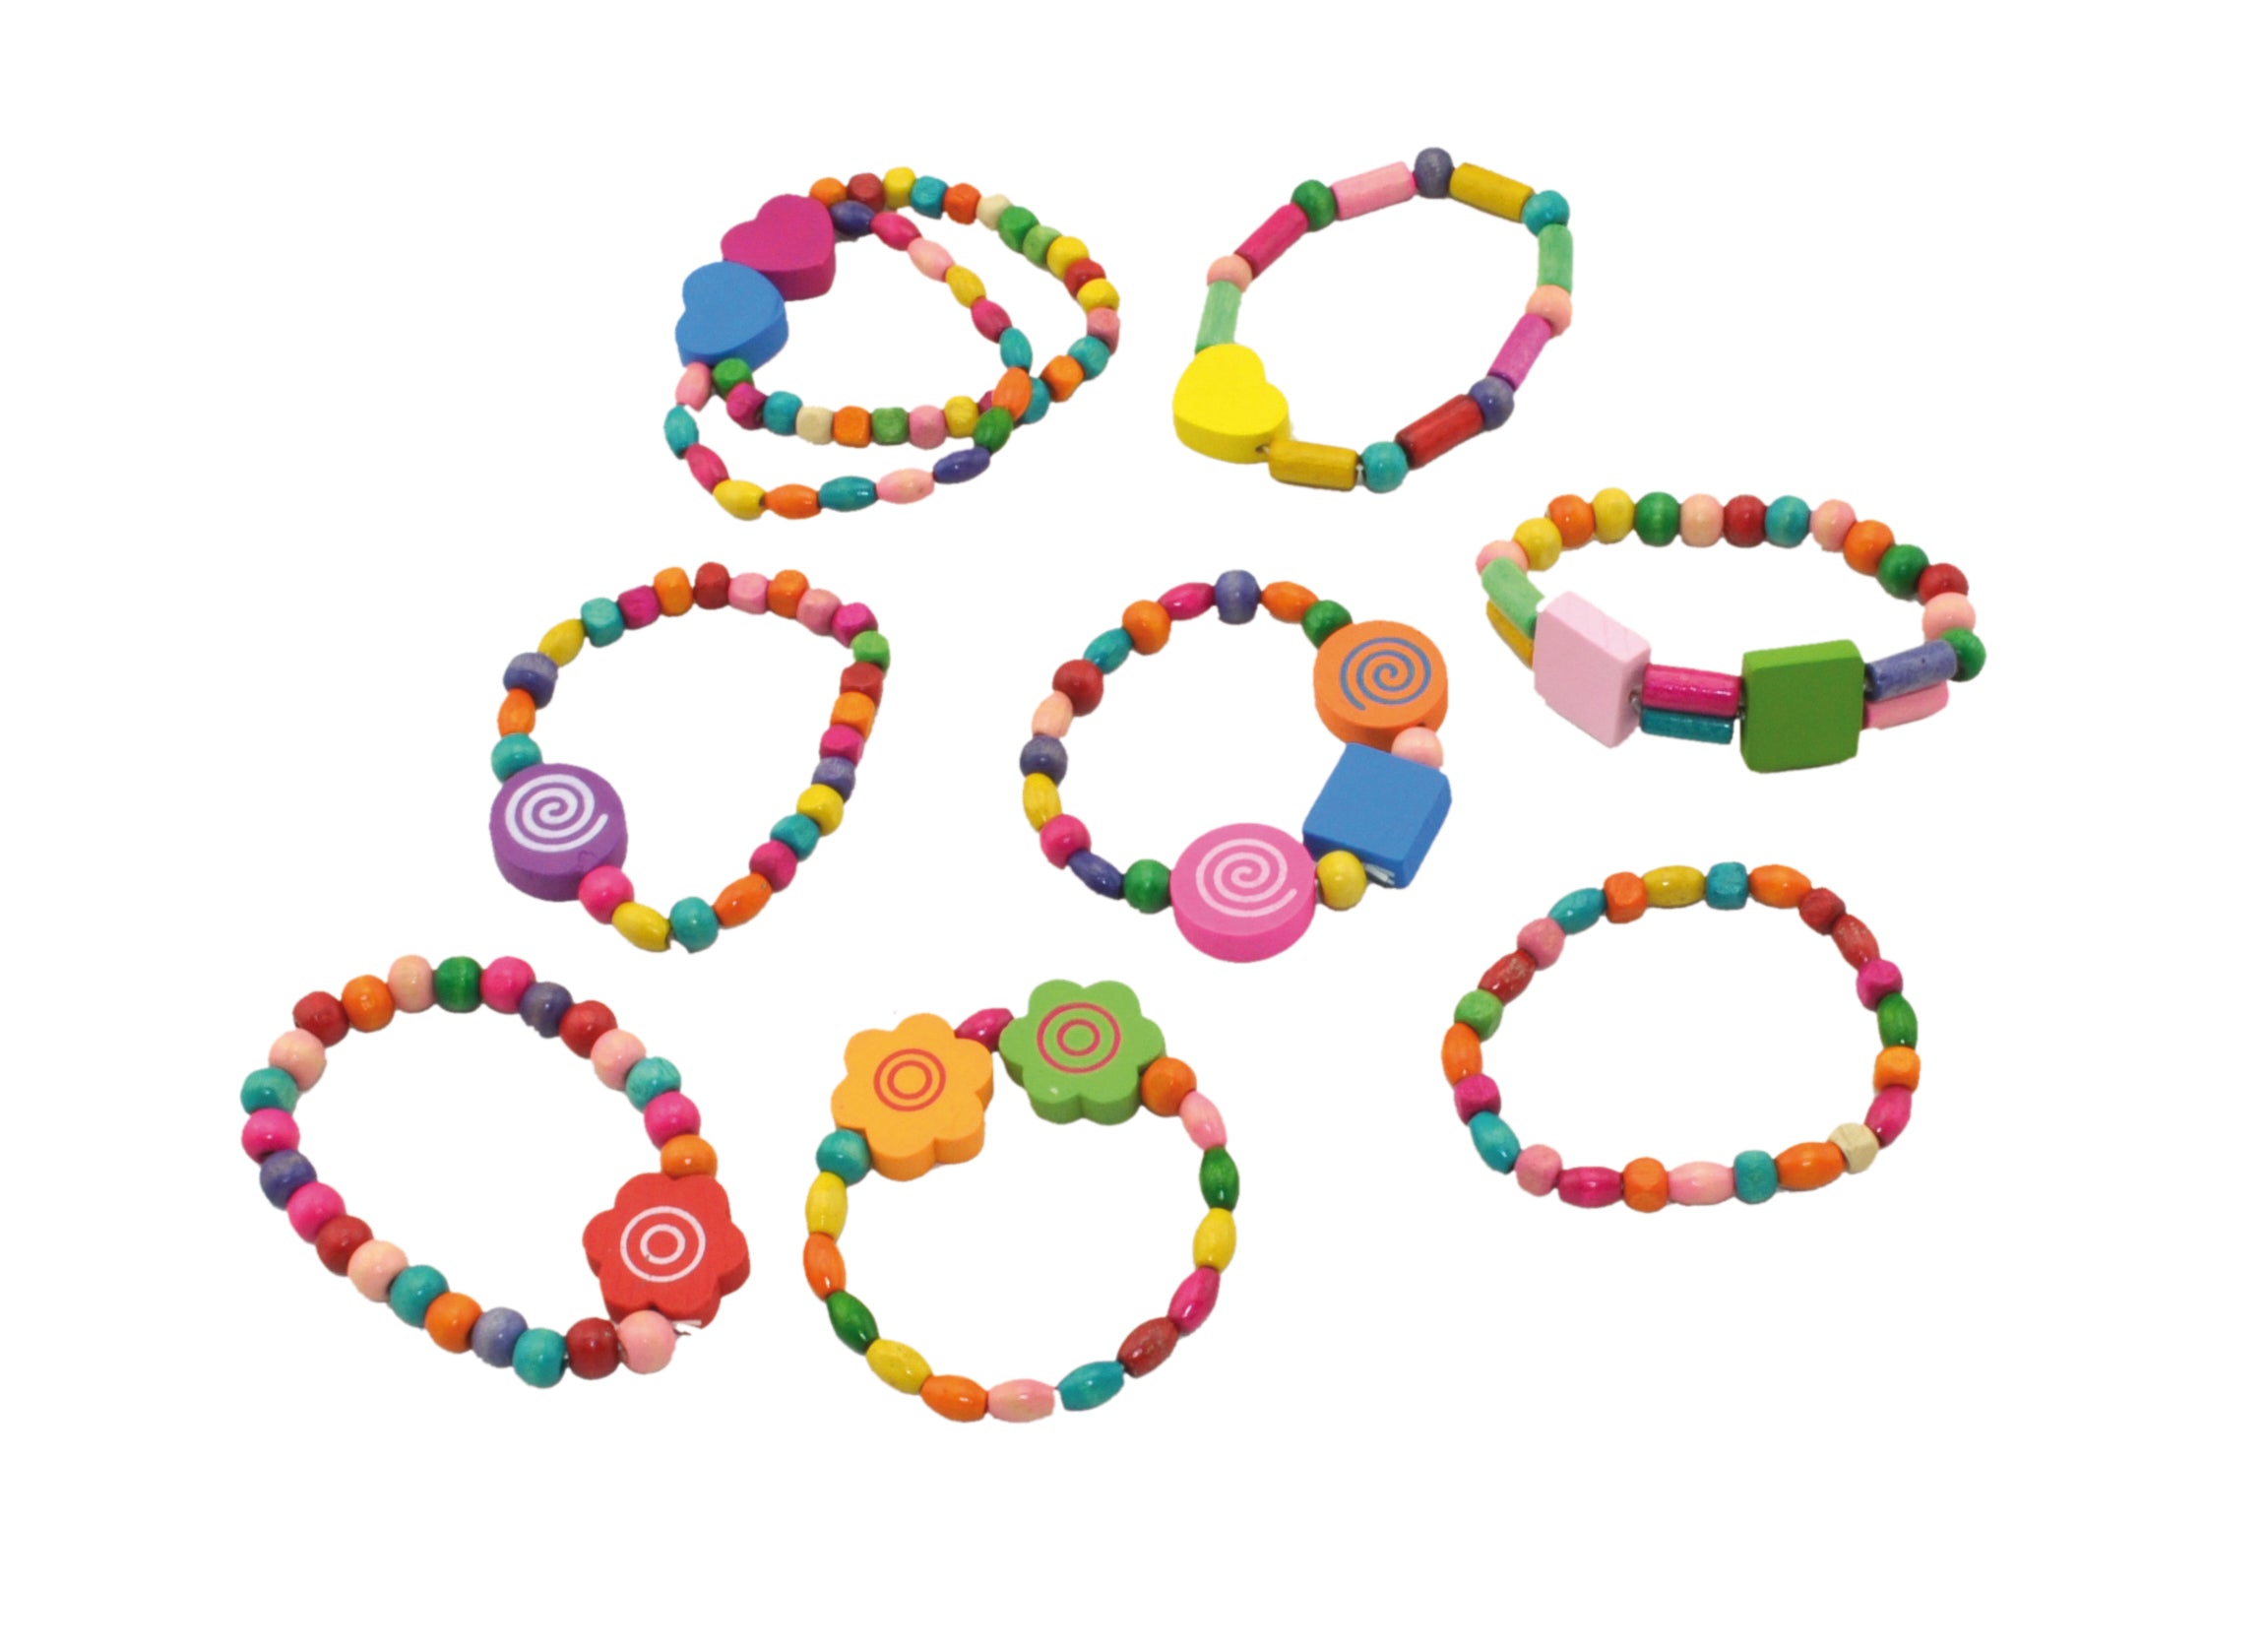 Colourful Wooden Bead Bracelets - Craft toy.